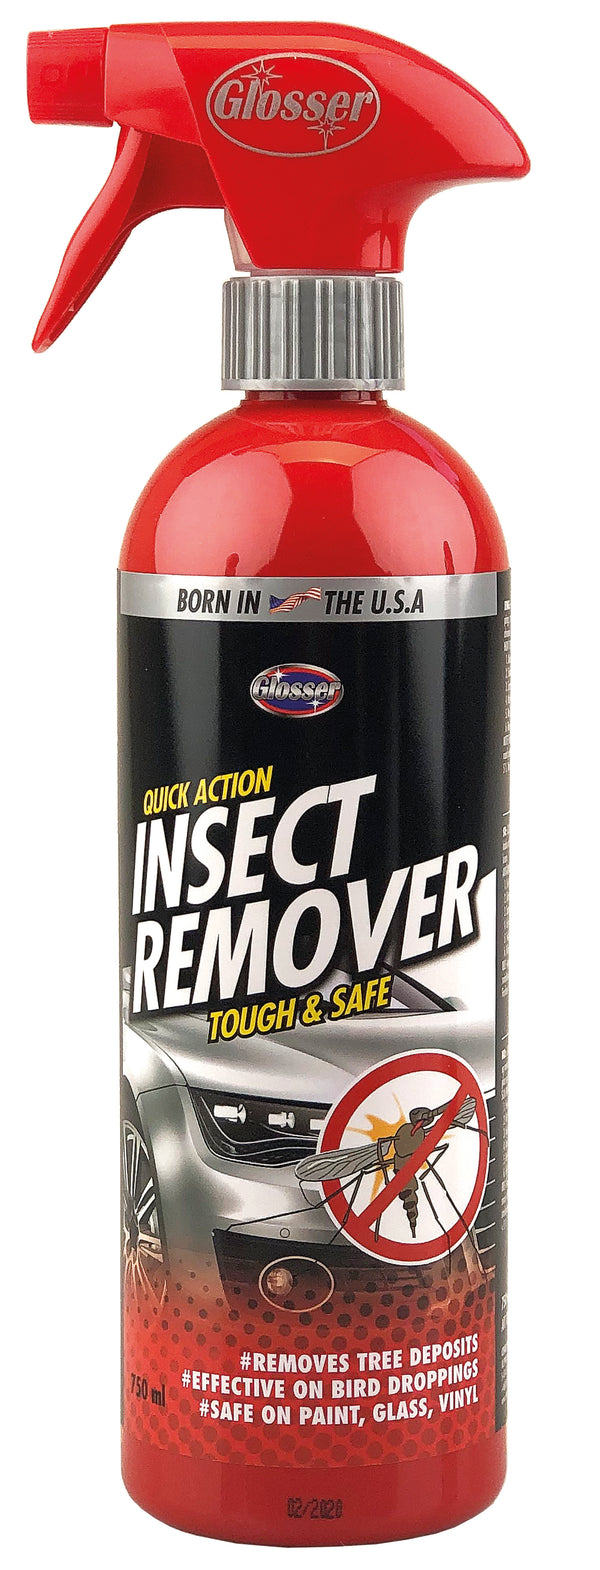 Glosser Insect Remover, 750ml